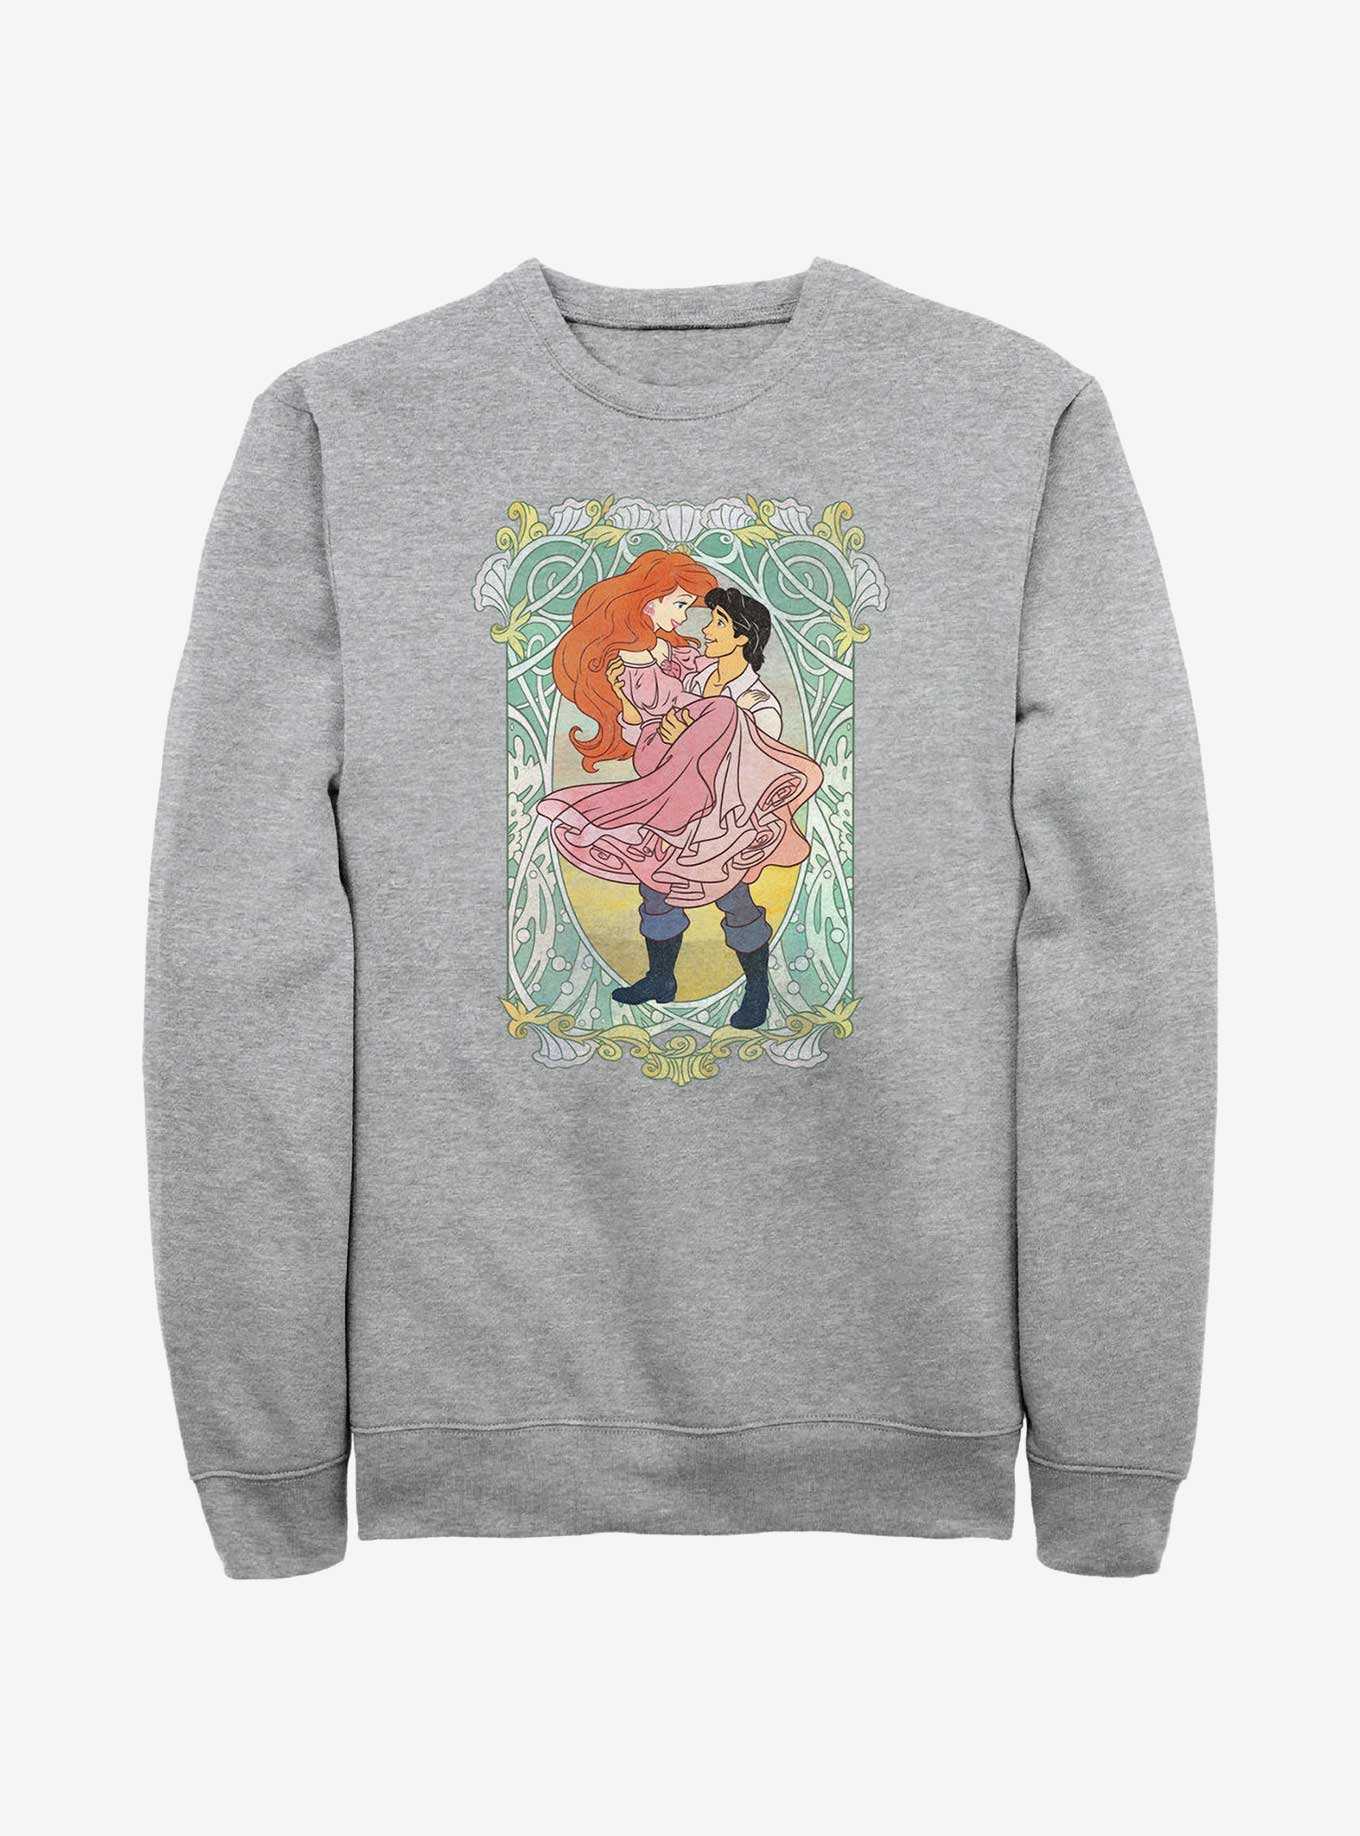 Disney The Little Mermaid Ariel and Eric Ever After Sweatshirt, , hi-res